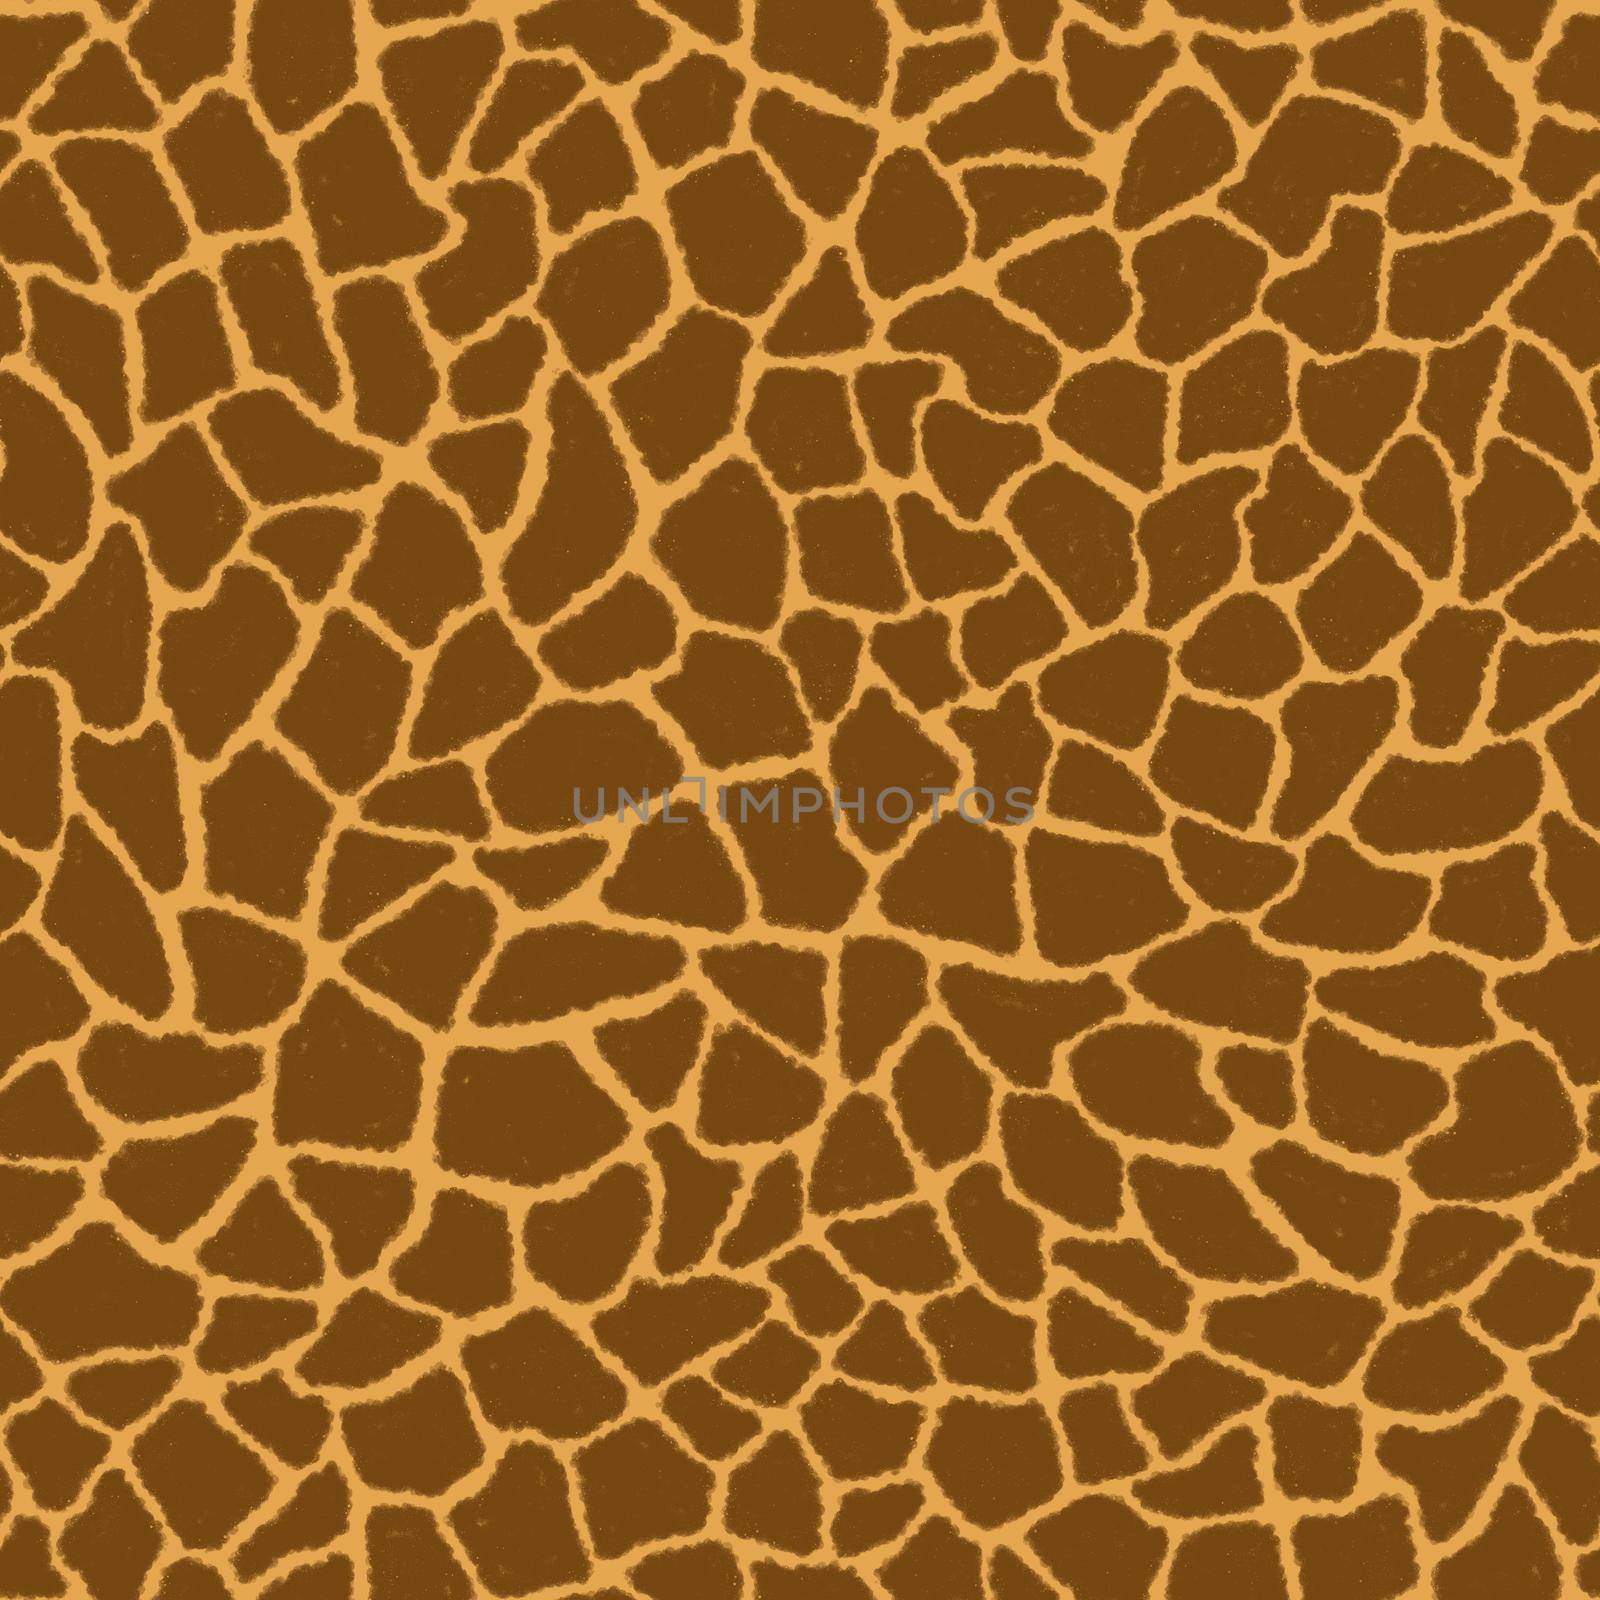 Giraffe skin color seamless pattern with fashion animal print for continuous replicate. Chaotic mosaic brown pieces on peach background. Wrapping paper, funny textile fabric print,design,decor.